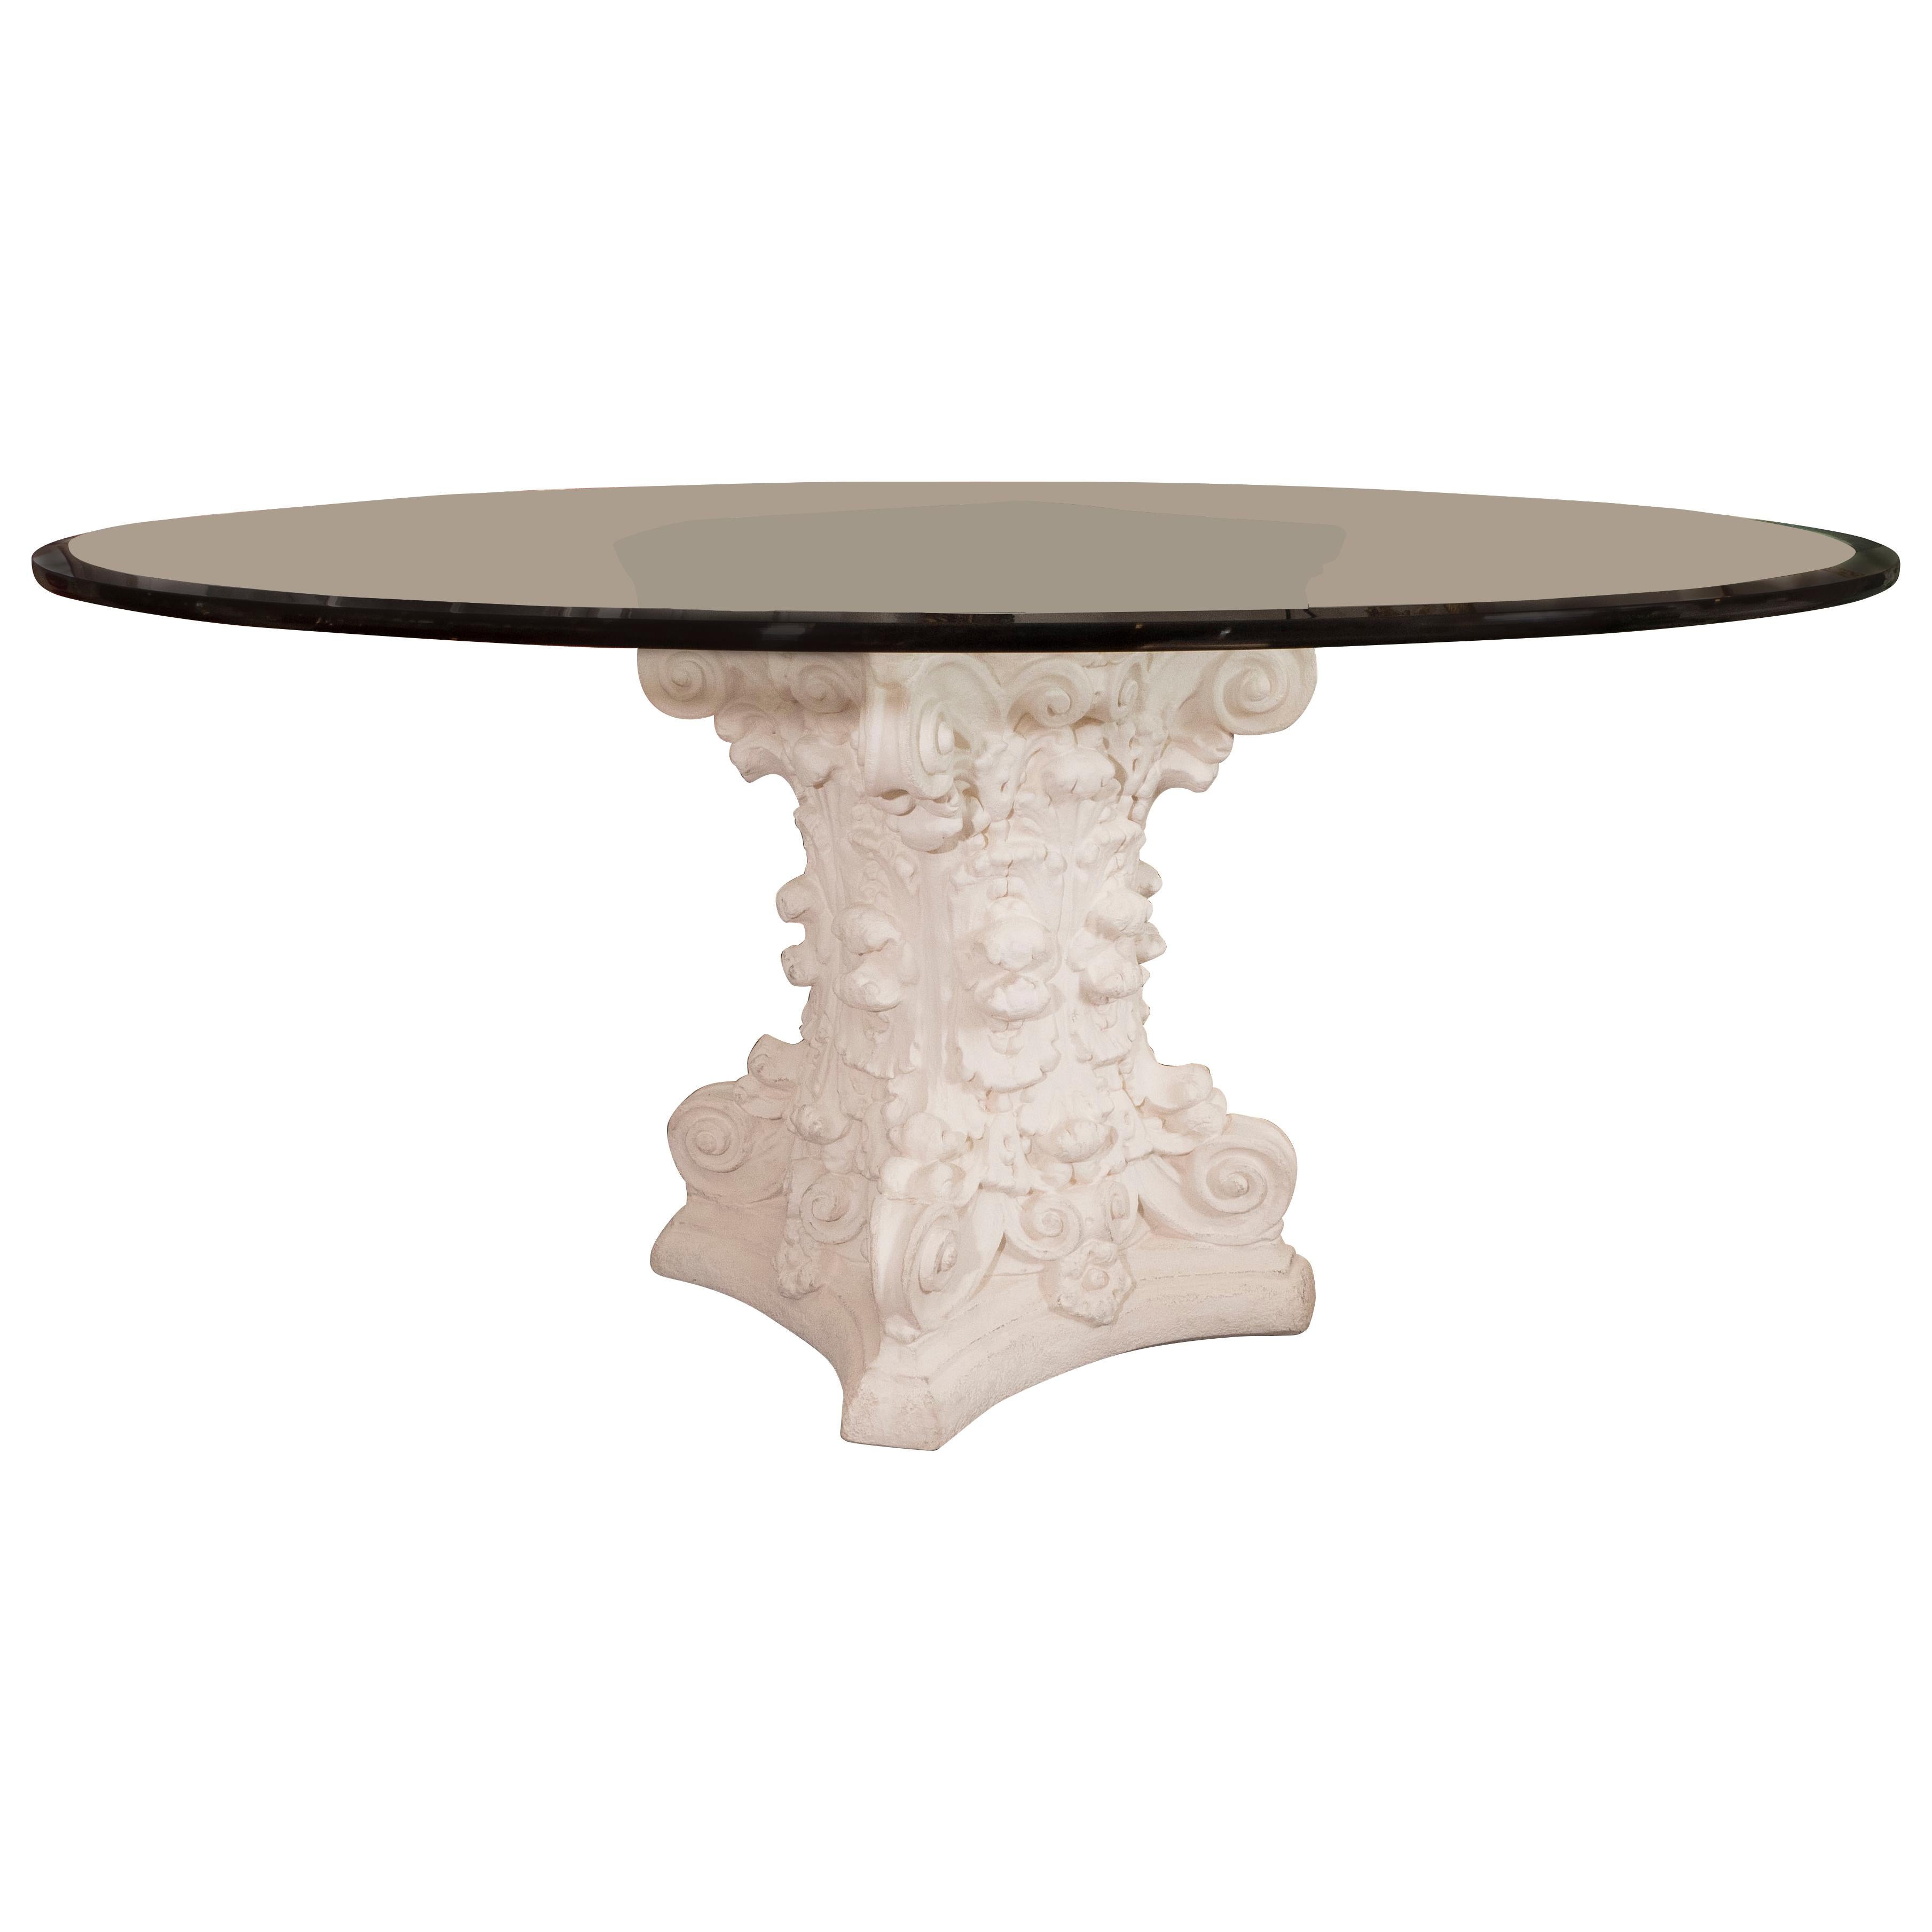 Round Dining Table For Sale